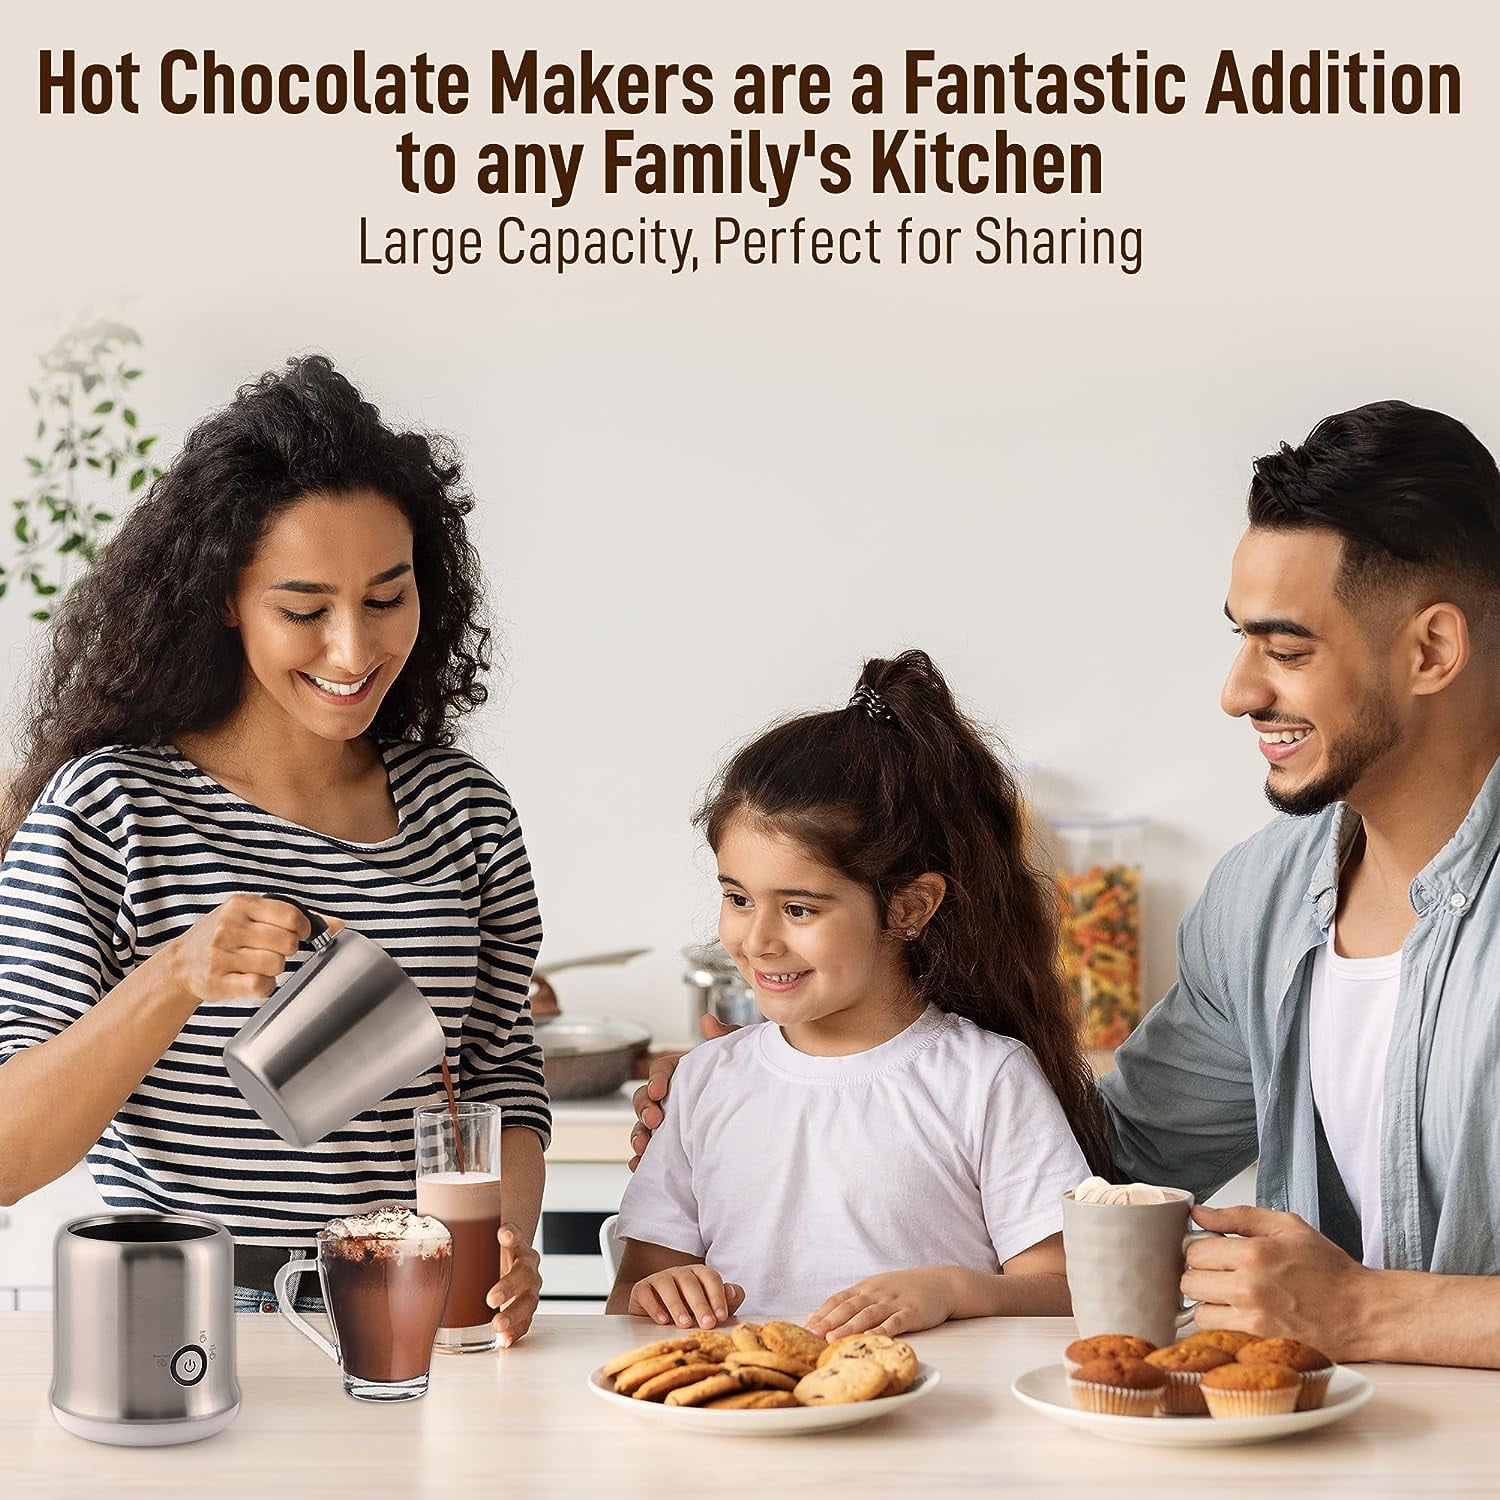  Zulay Electric Hot Chocolate Maker Machine - Powerful,  Stainless Steel Hot Chocolate Machine & Hot Cocoa Maker - 4-in-1 Detachable  Milk Frother Heater & Cold Foam Maker - Milk Frother Dishwasher